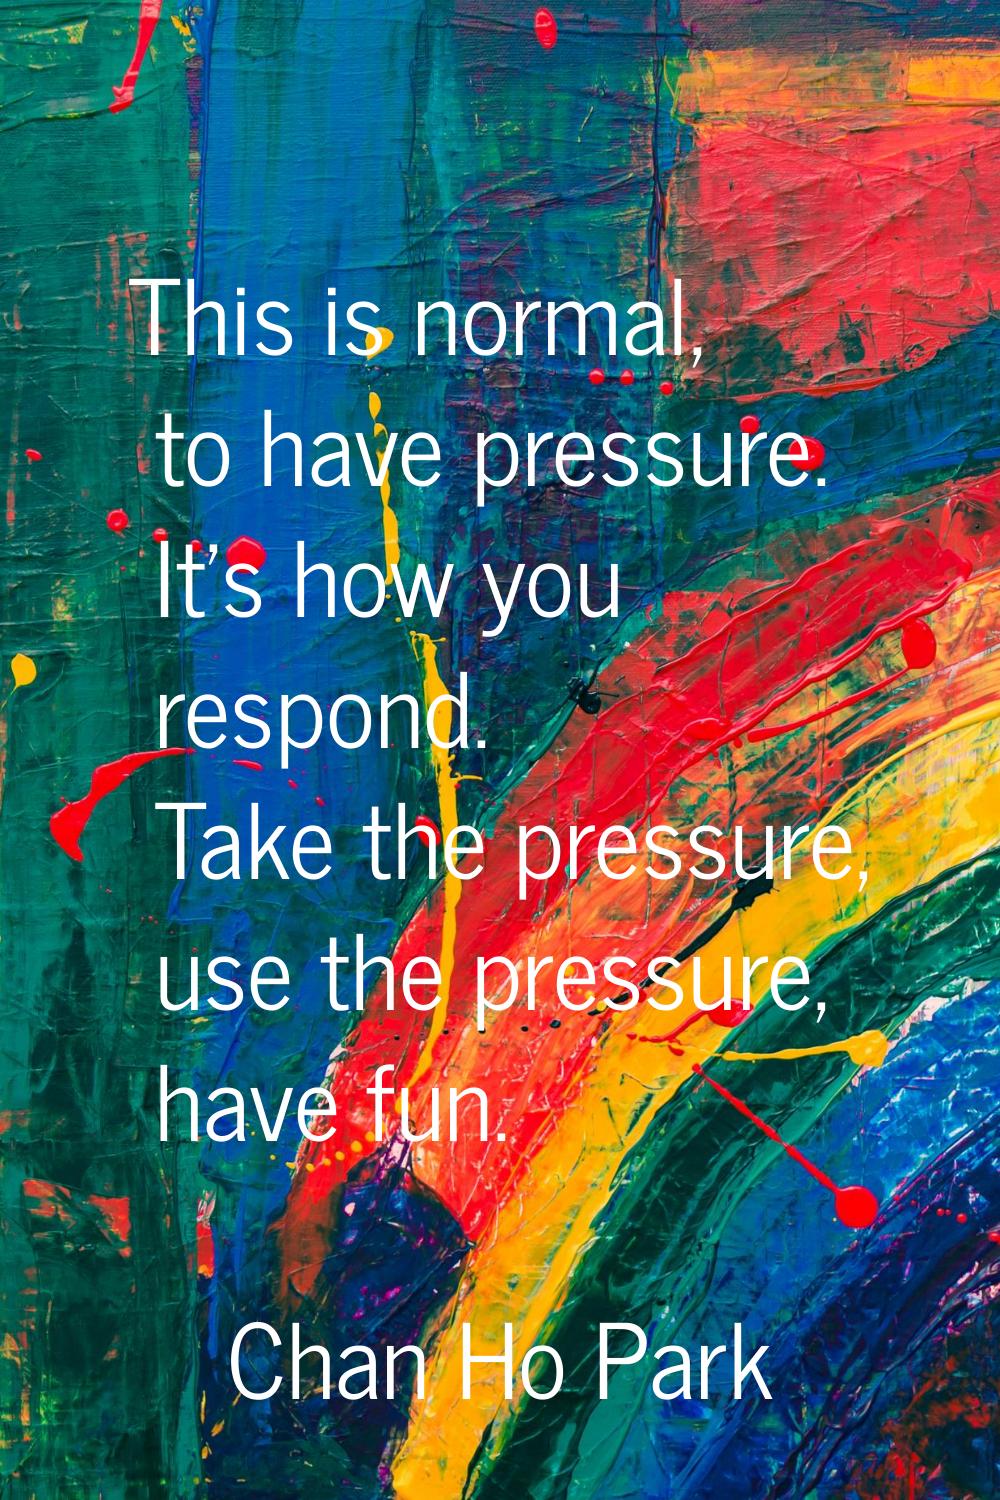 This is normal, to have pressure. It's how you respond. Take the pressure, use the pressure, have f